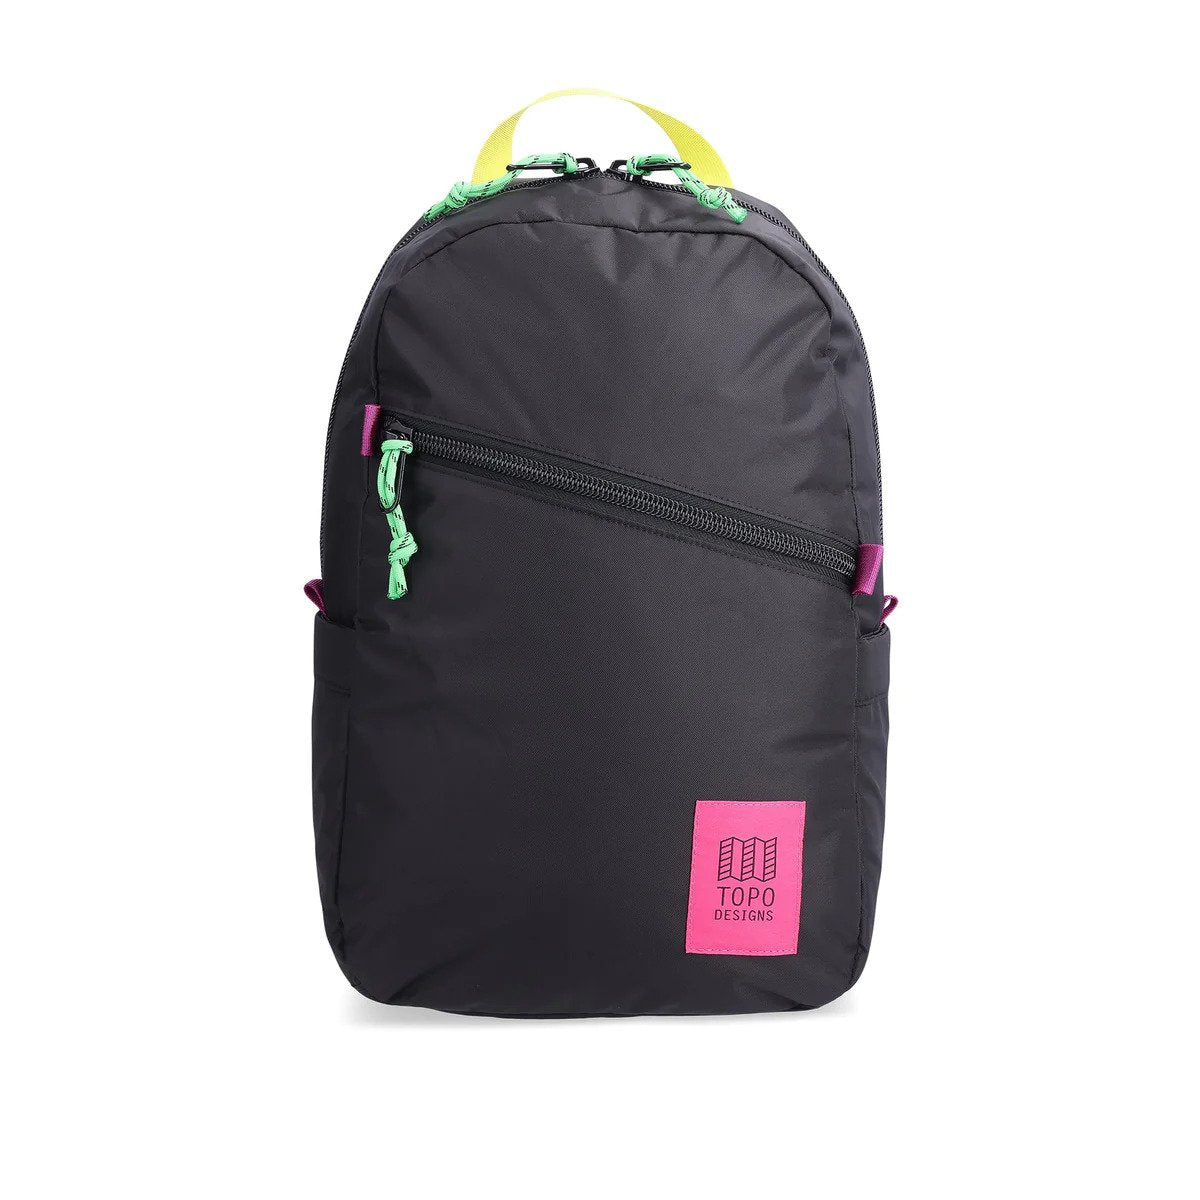 Front view of Topo Designs Light Pack in recycled "Black / Pink" nylon.